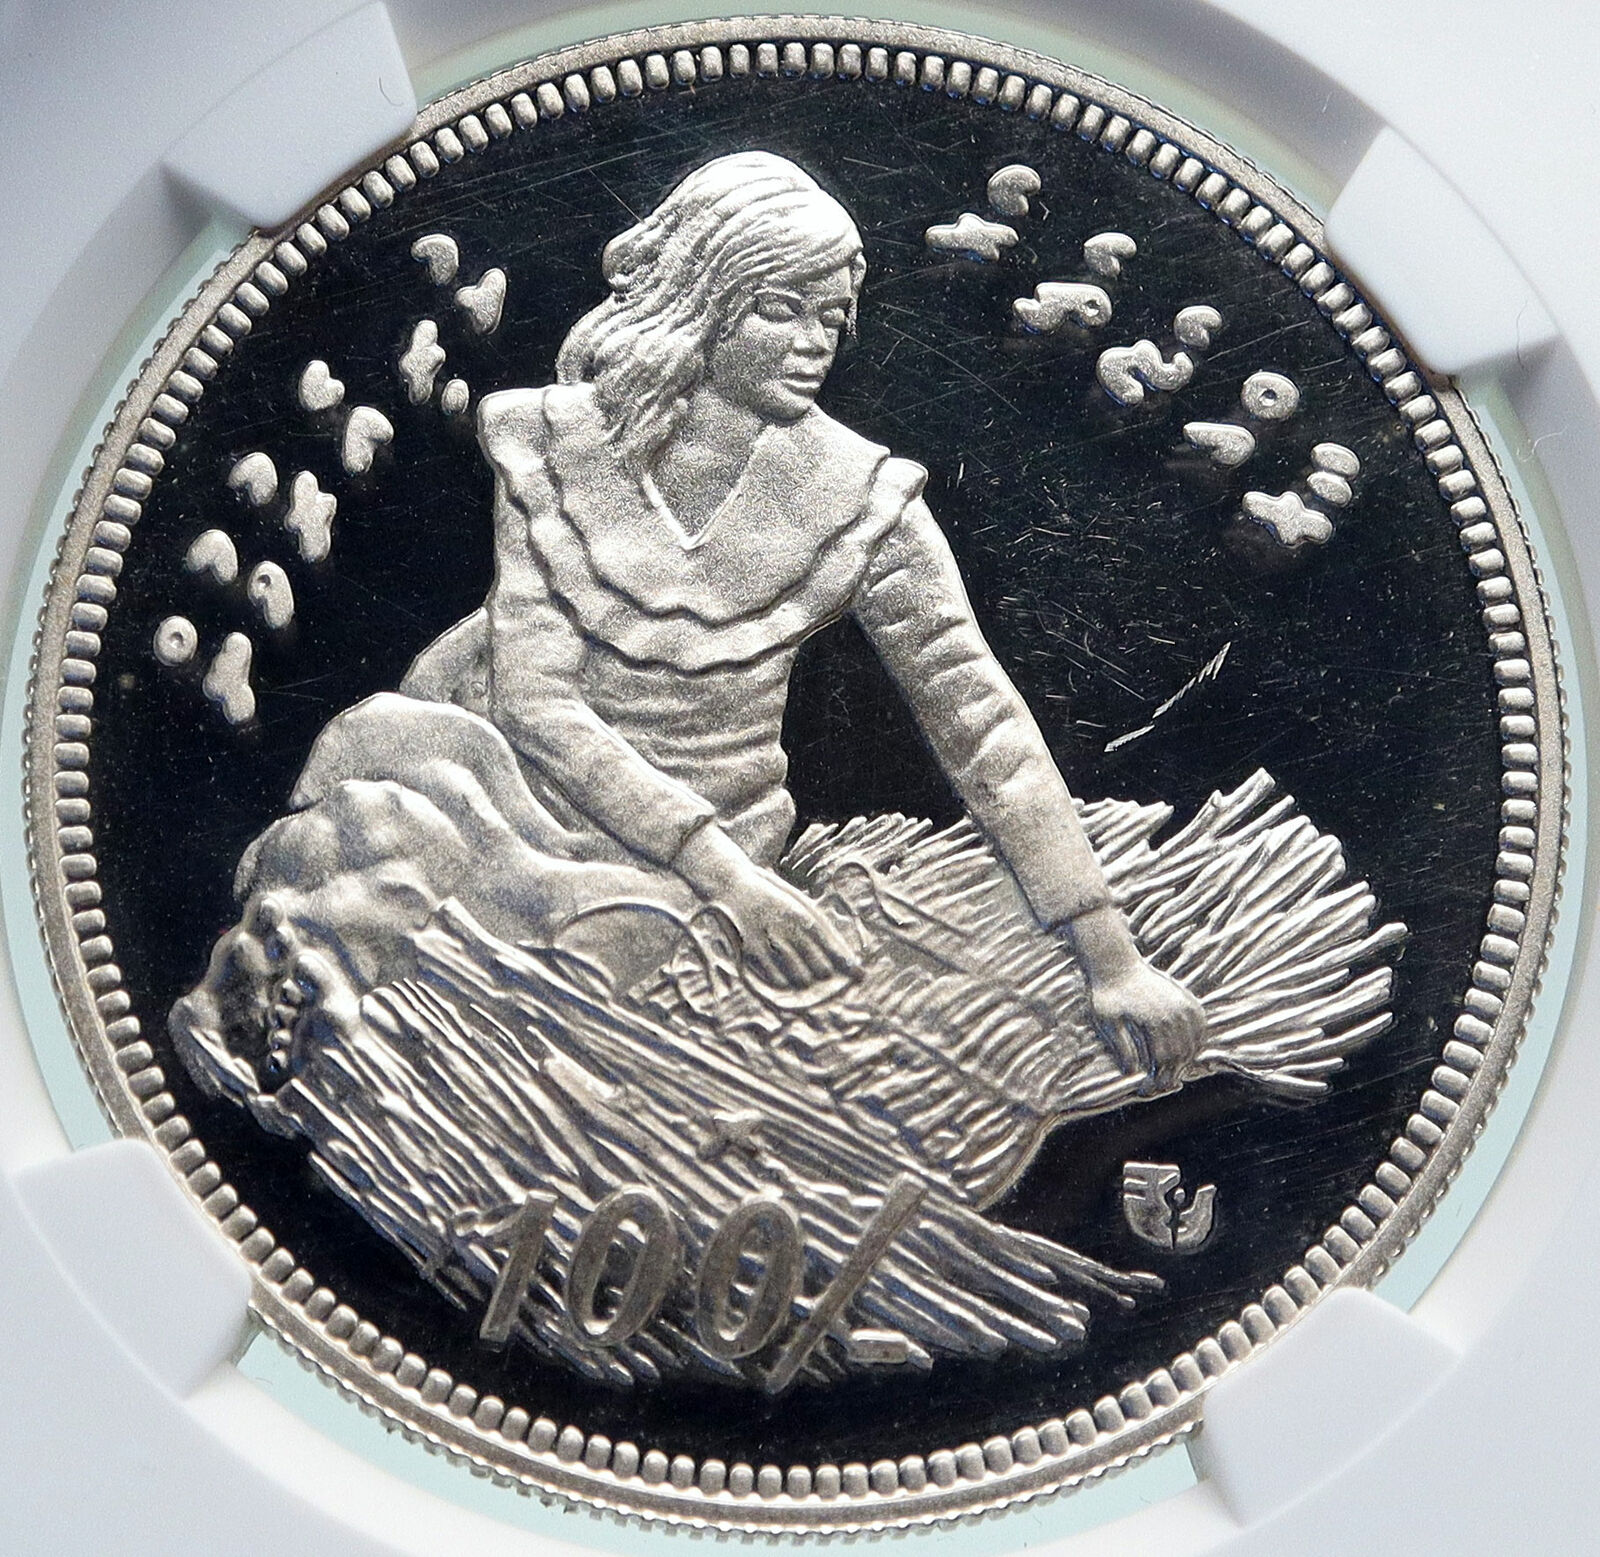 1979 MALDIVES ISLANDS Food Agriculture GIRL Proof Silver 100 Ruf Coin NGC i86673